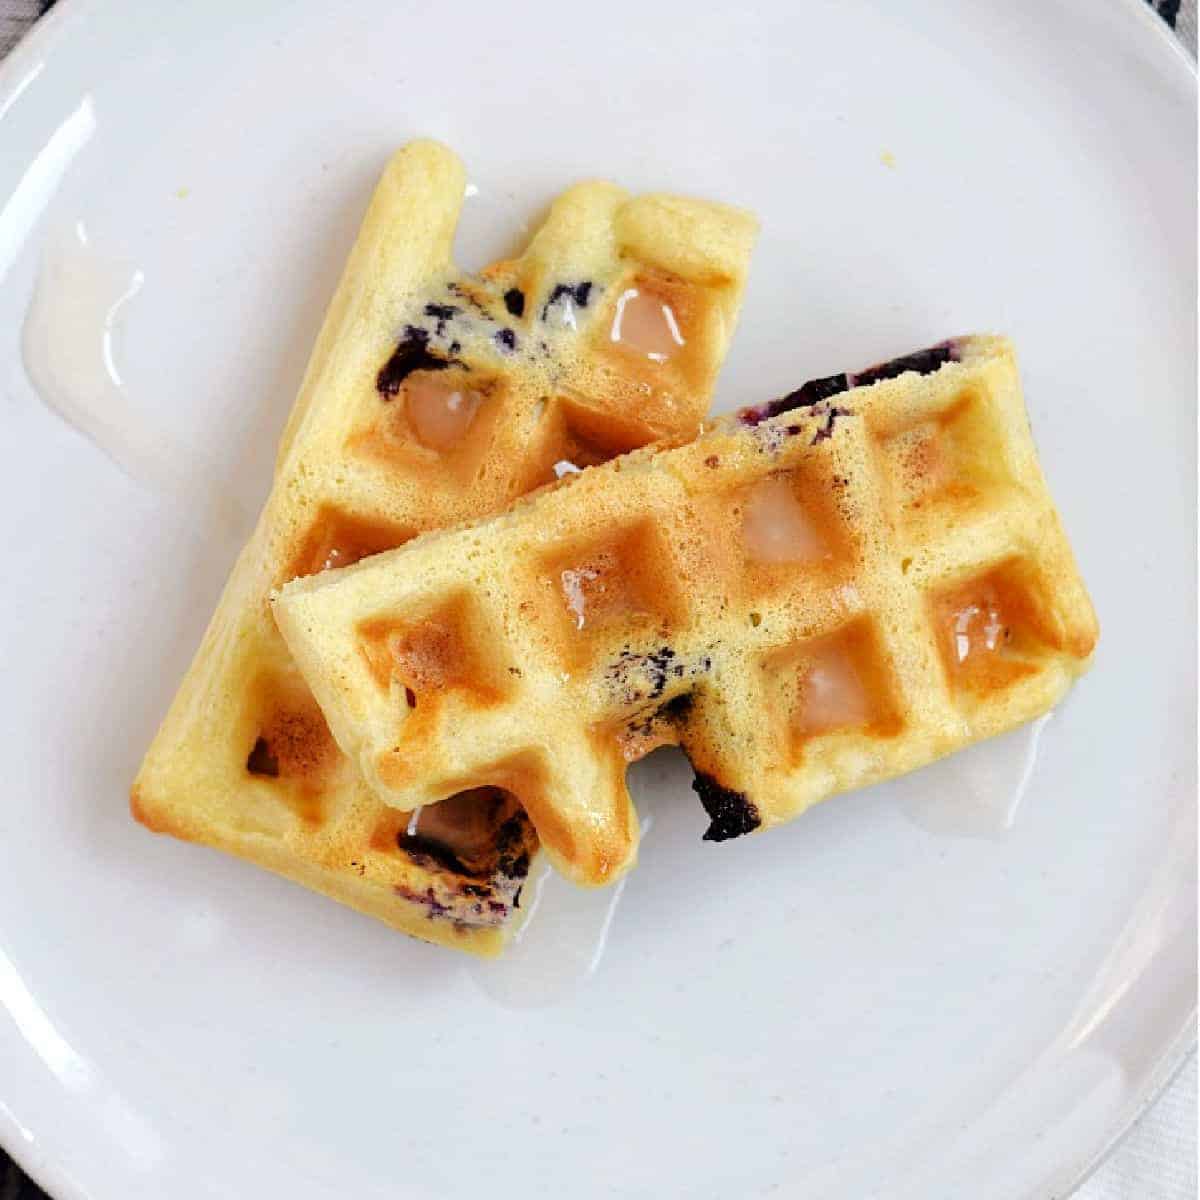 A blueberry and lemon waffle that is cut in half drizzled and with glaze on a white plate.